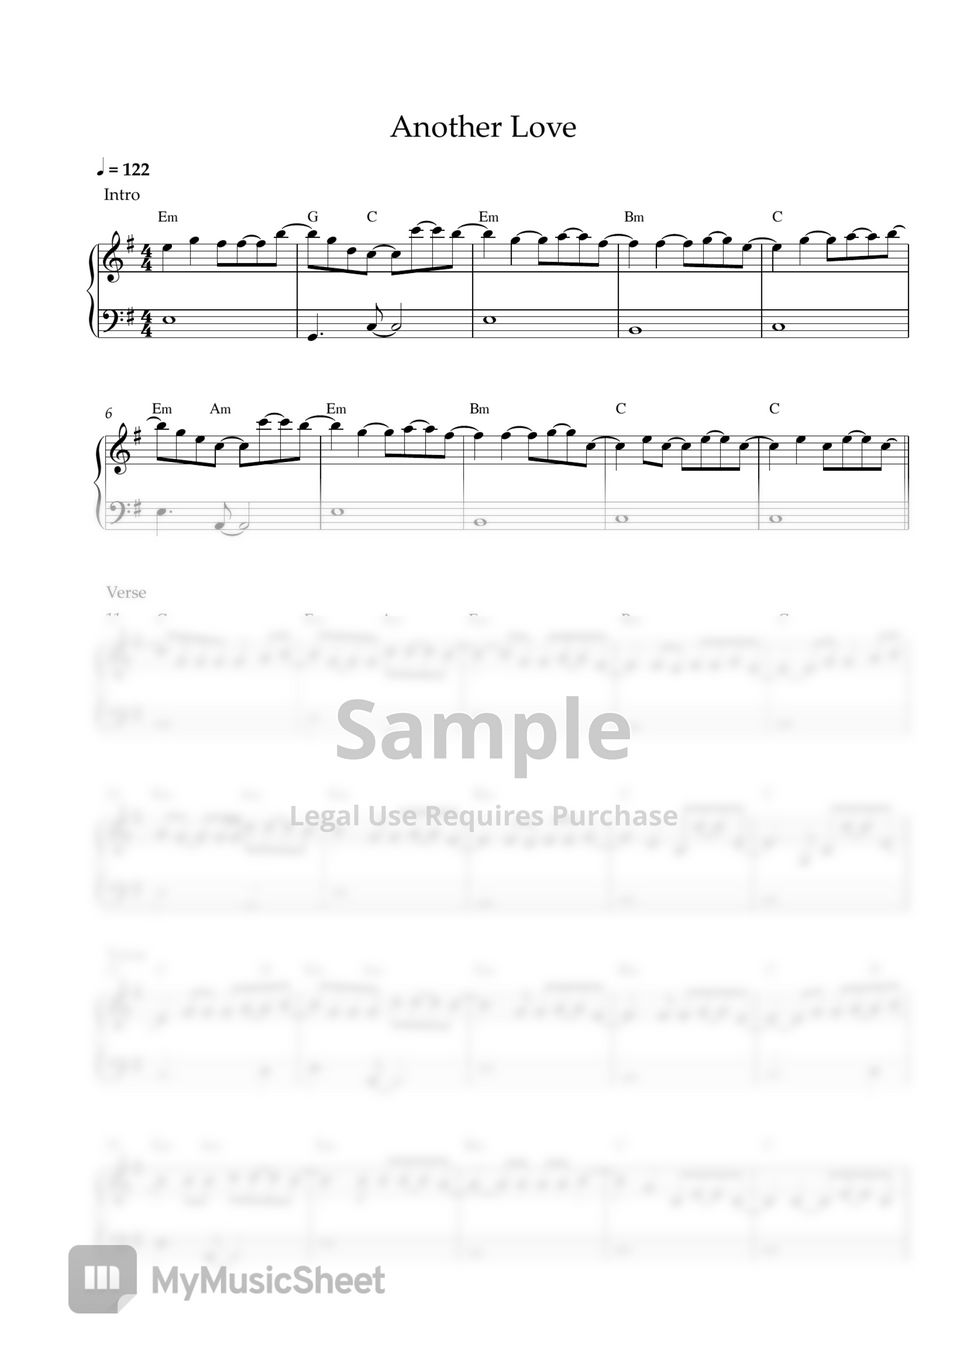 Another Love - Tom Odell Sheet music for Piano (Solo)